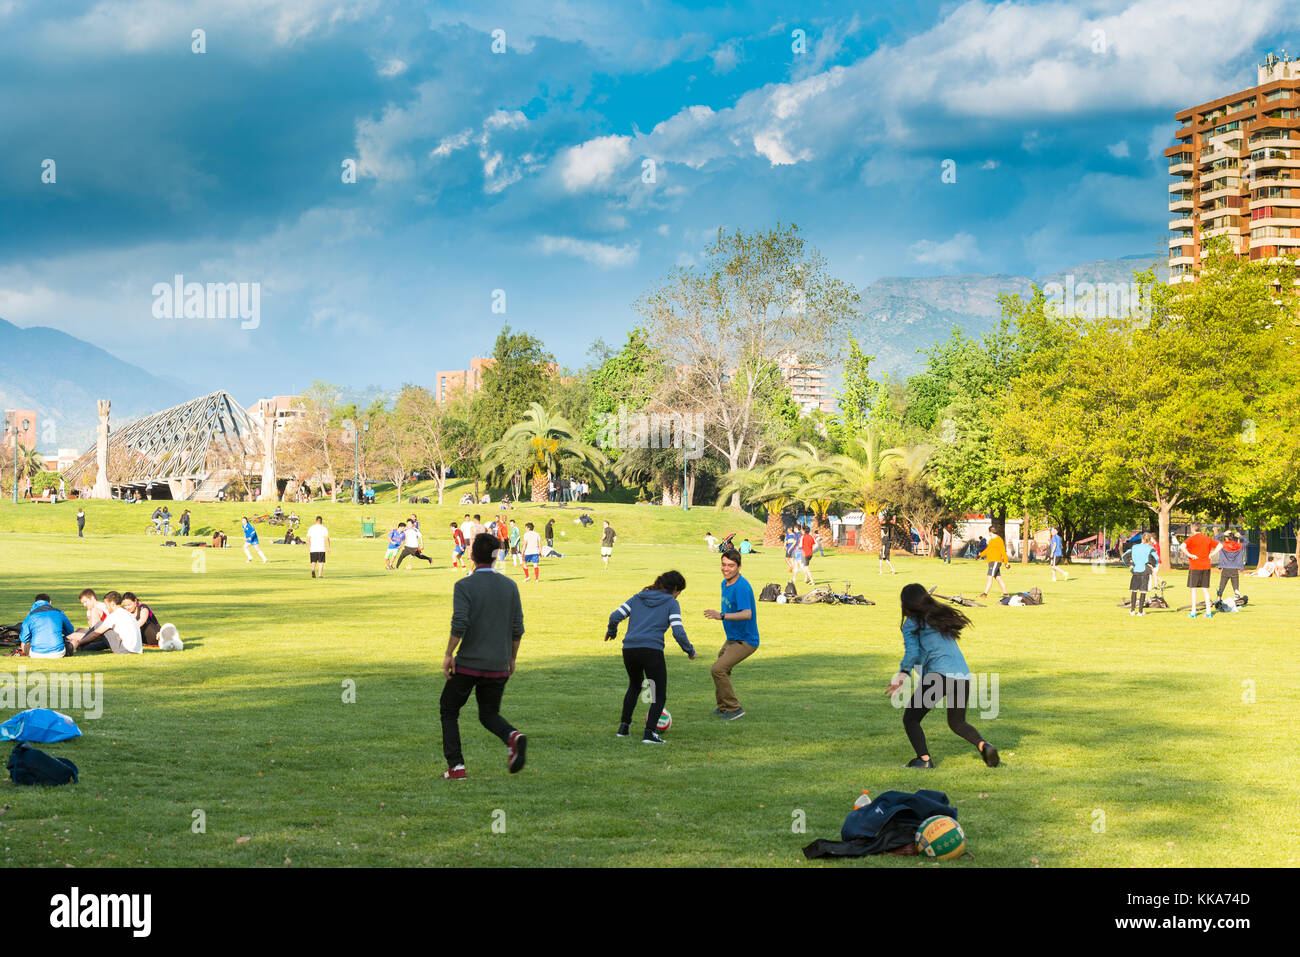 Santiago, Region Metropolitana, Chile - People gather and practice sports on the weekend at Parque Araucano, the mayor urban park in Stock Photo